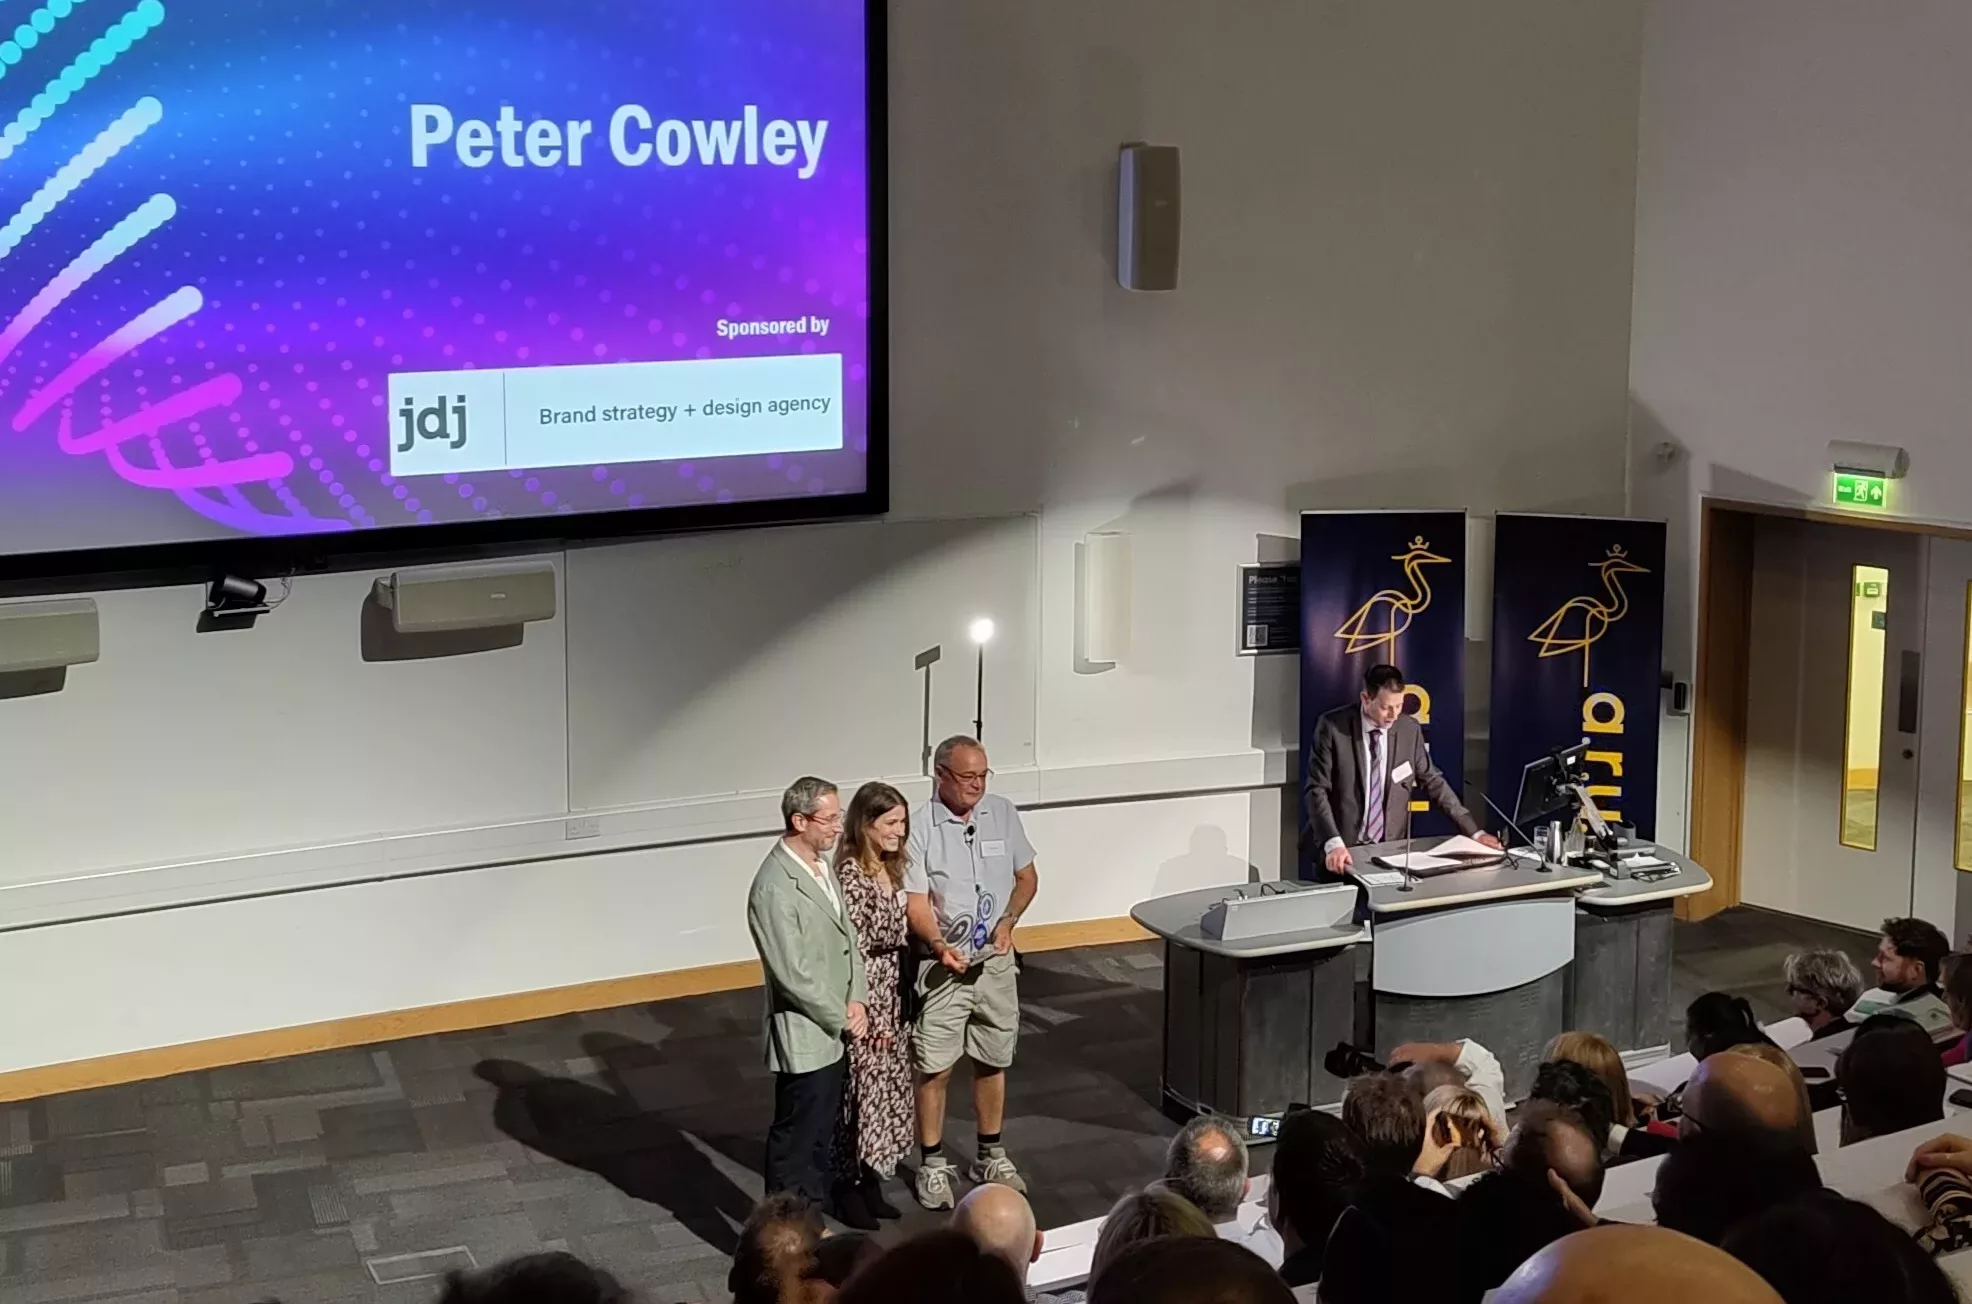 Profile on… Peter Cowley